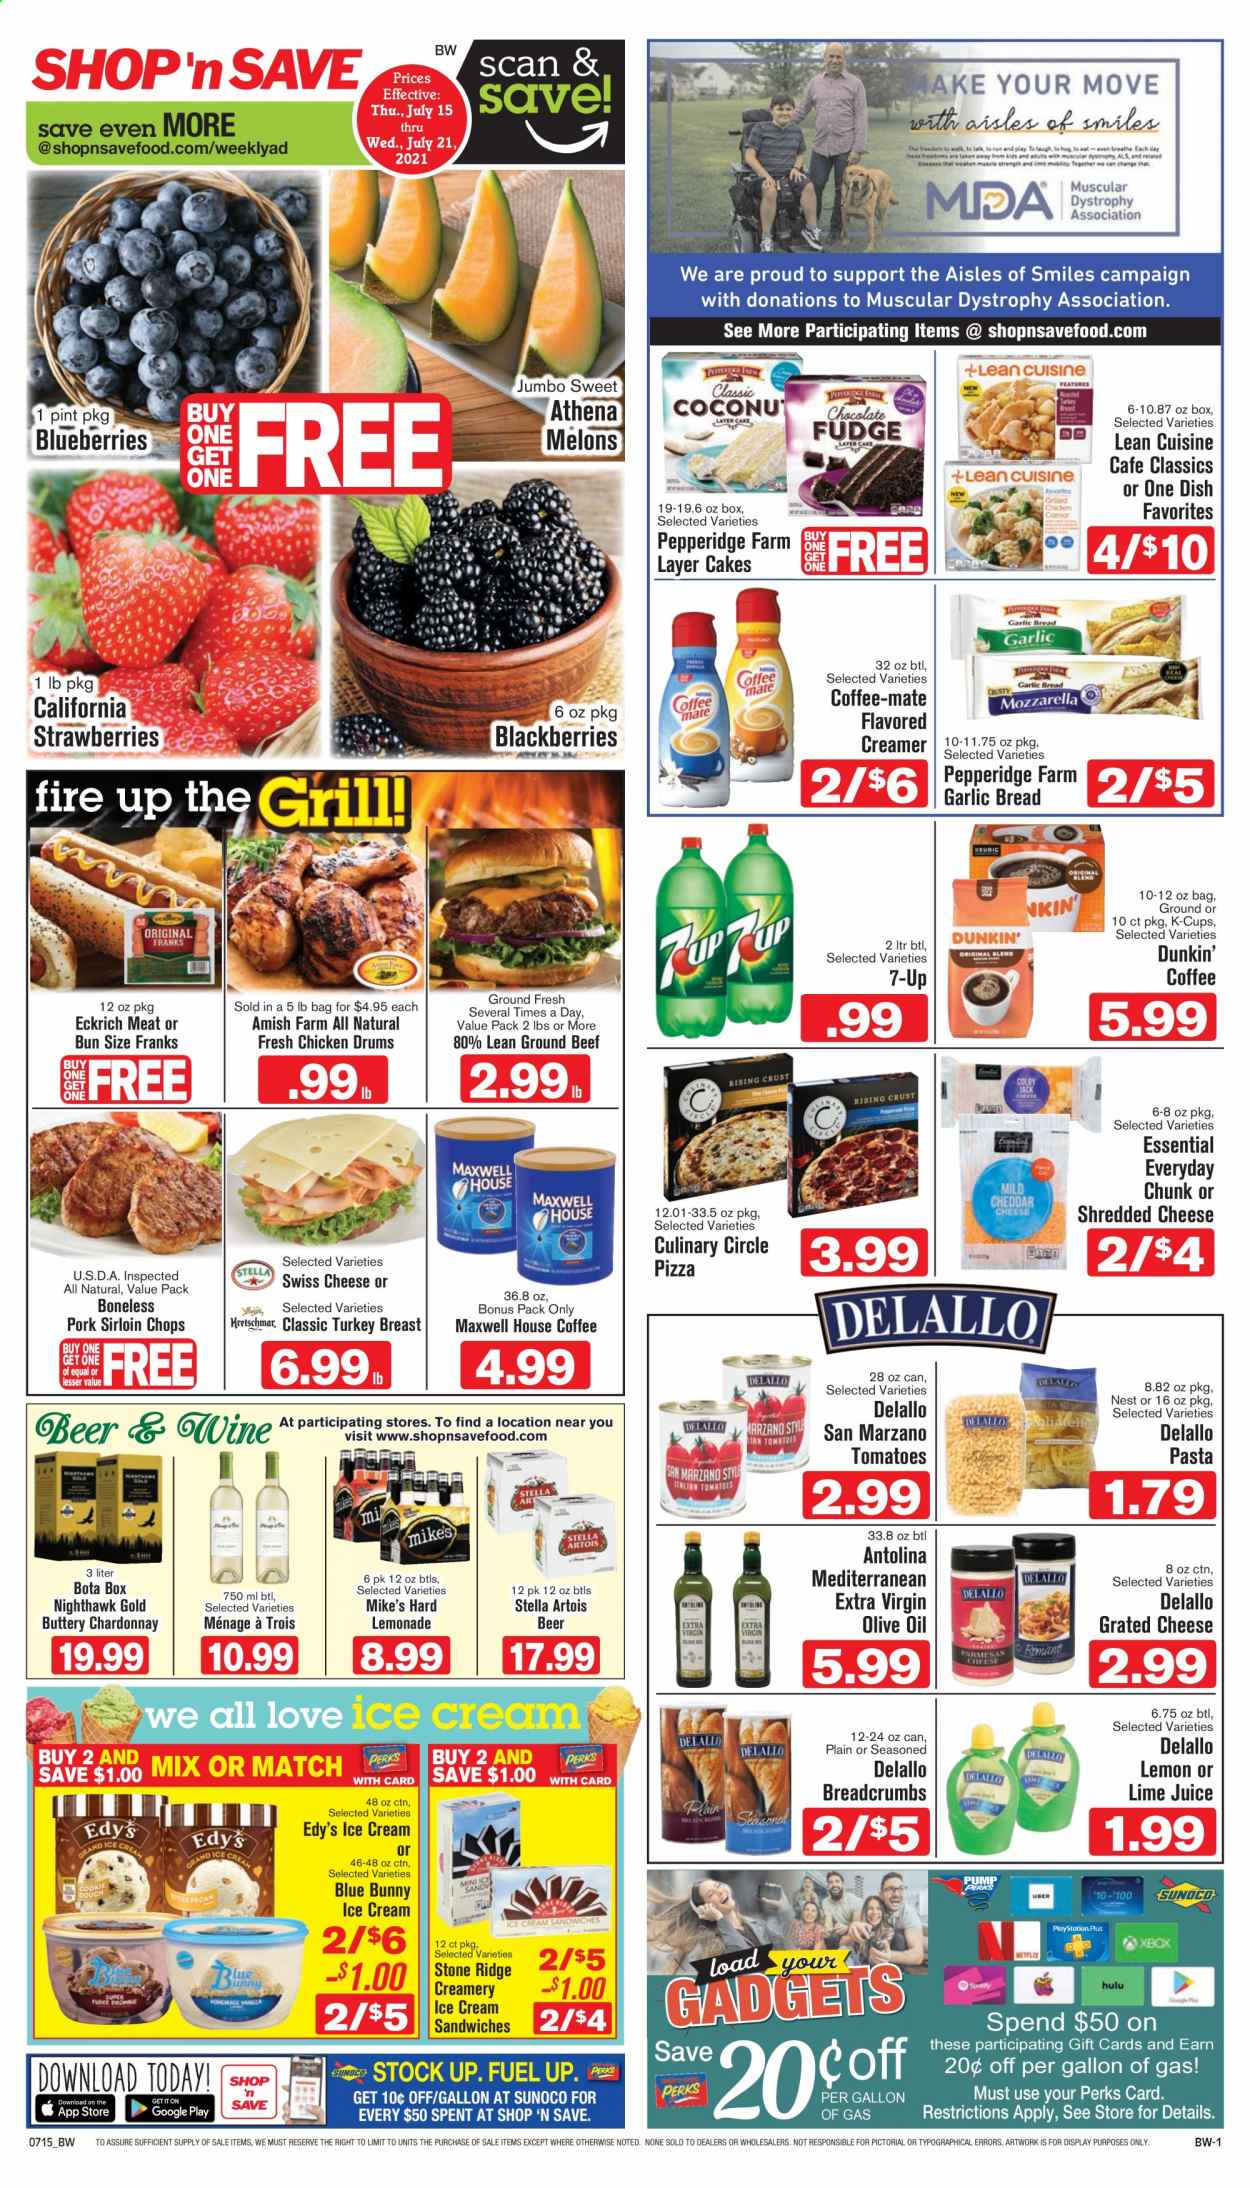 thumbnail - Shop ‘n Save Flyer - 07/15/2021 - 07/21/2021 - Sales products - Stella Artois, bread, cake, turnovers, breadcrumbs, tomatoes, blackberries, blueberries, strawberries, Welch's, beef meat, ground beef, pork loin, pizza, pasta sauce, Barilla, Lean Cuisine, shredded cheese, swiss cheese, grated cheese, Coffee-Mate, milk, creamer, ice cream, ice cream sandwich, Nestlé, wafers, snack, jelly, pretzel crisps, baked beans, extra virgin olive oil, olive oil, oil, fruit jam, lemonade, 7UP, Maxwell House, Starbucks, coffee capsules, K-Cups, white wine, Chardonnay, beer, melons. Page 1.